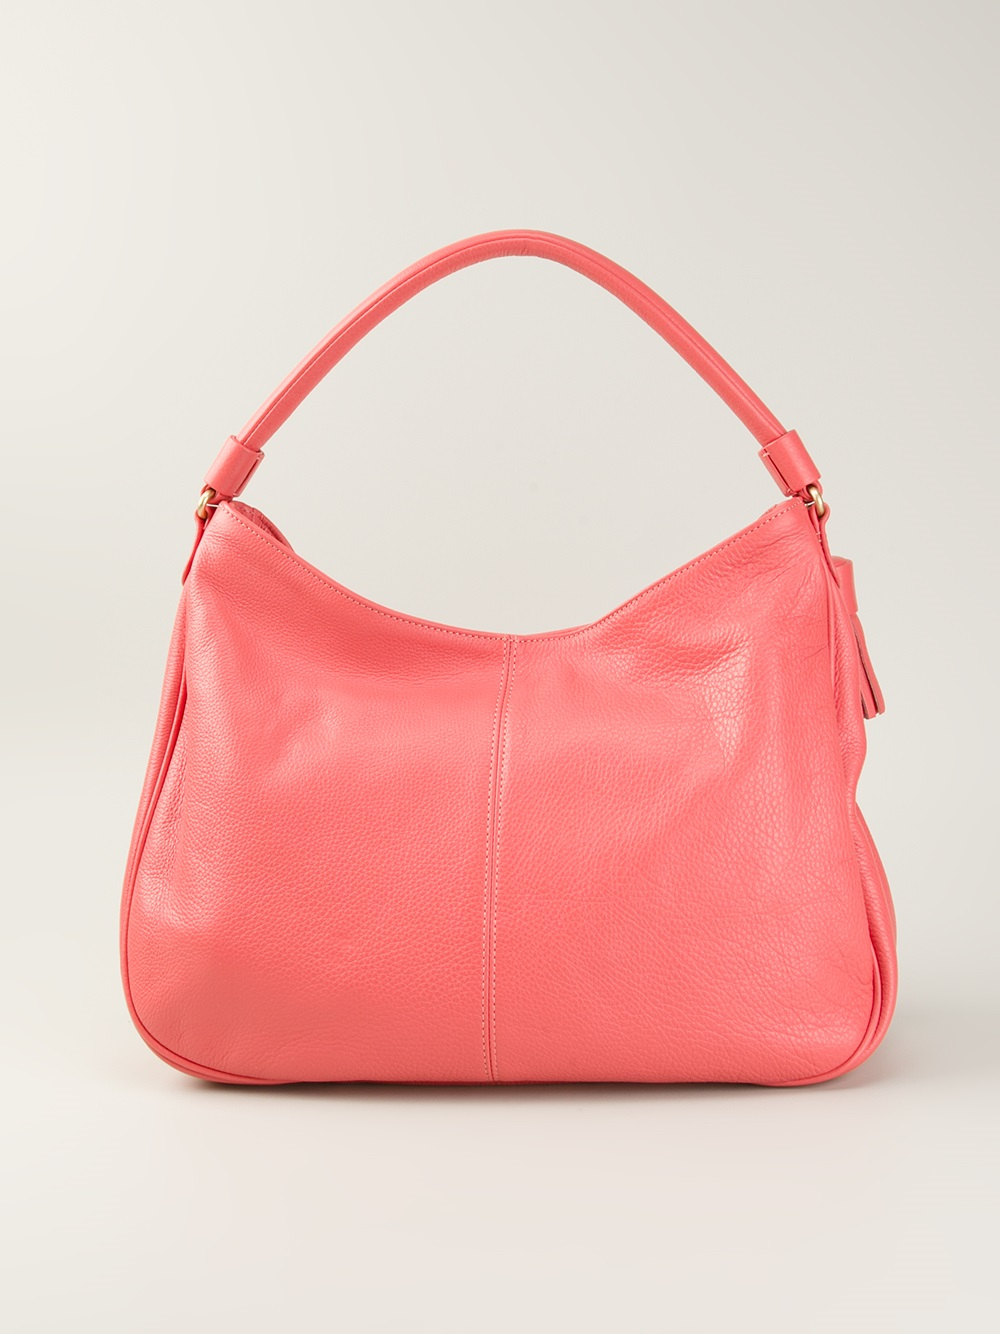 See By Chloé Cherry Hobo Shoulder Bag In Pink And Purple Pink Lyst 2950